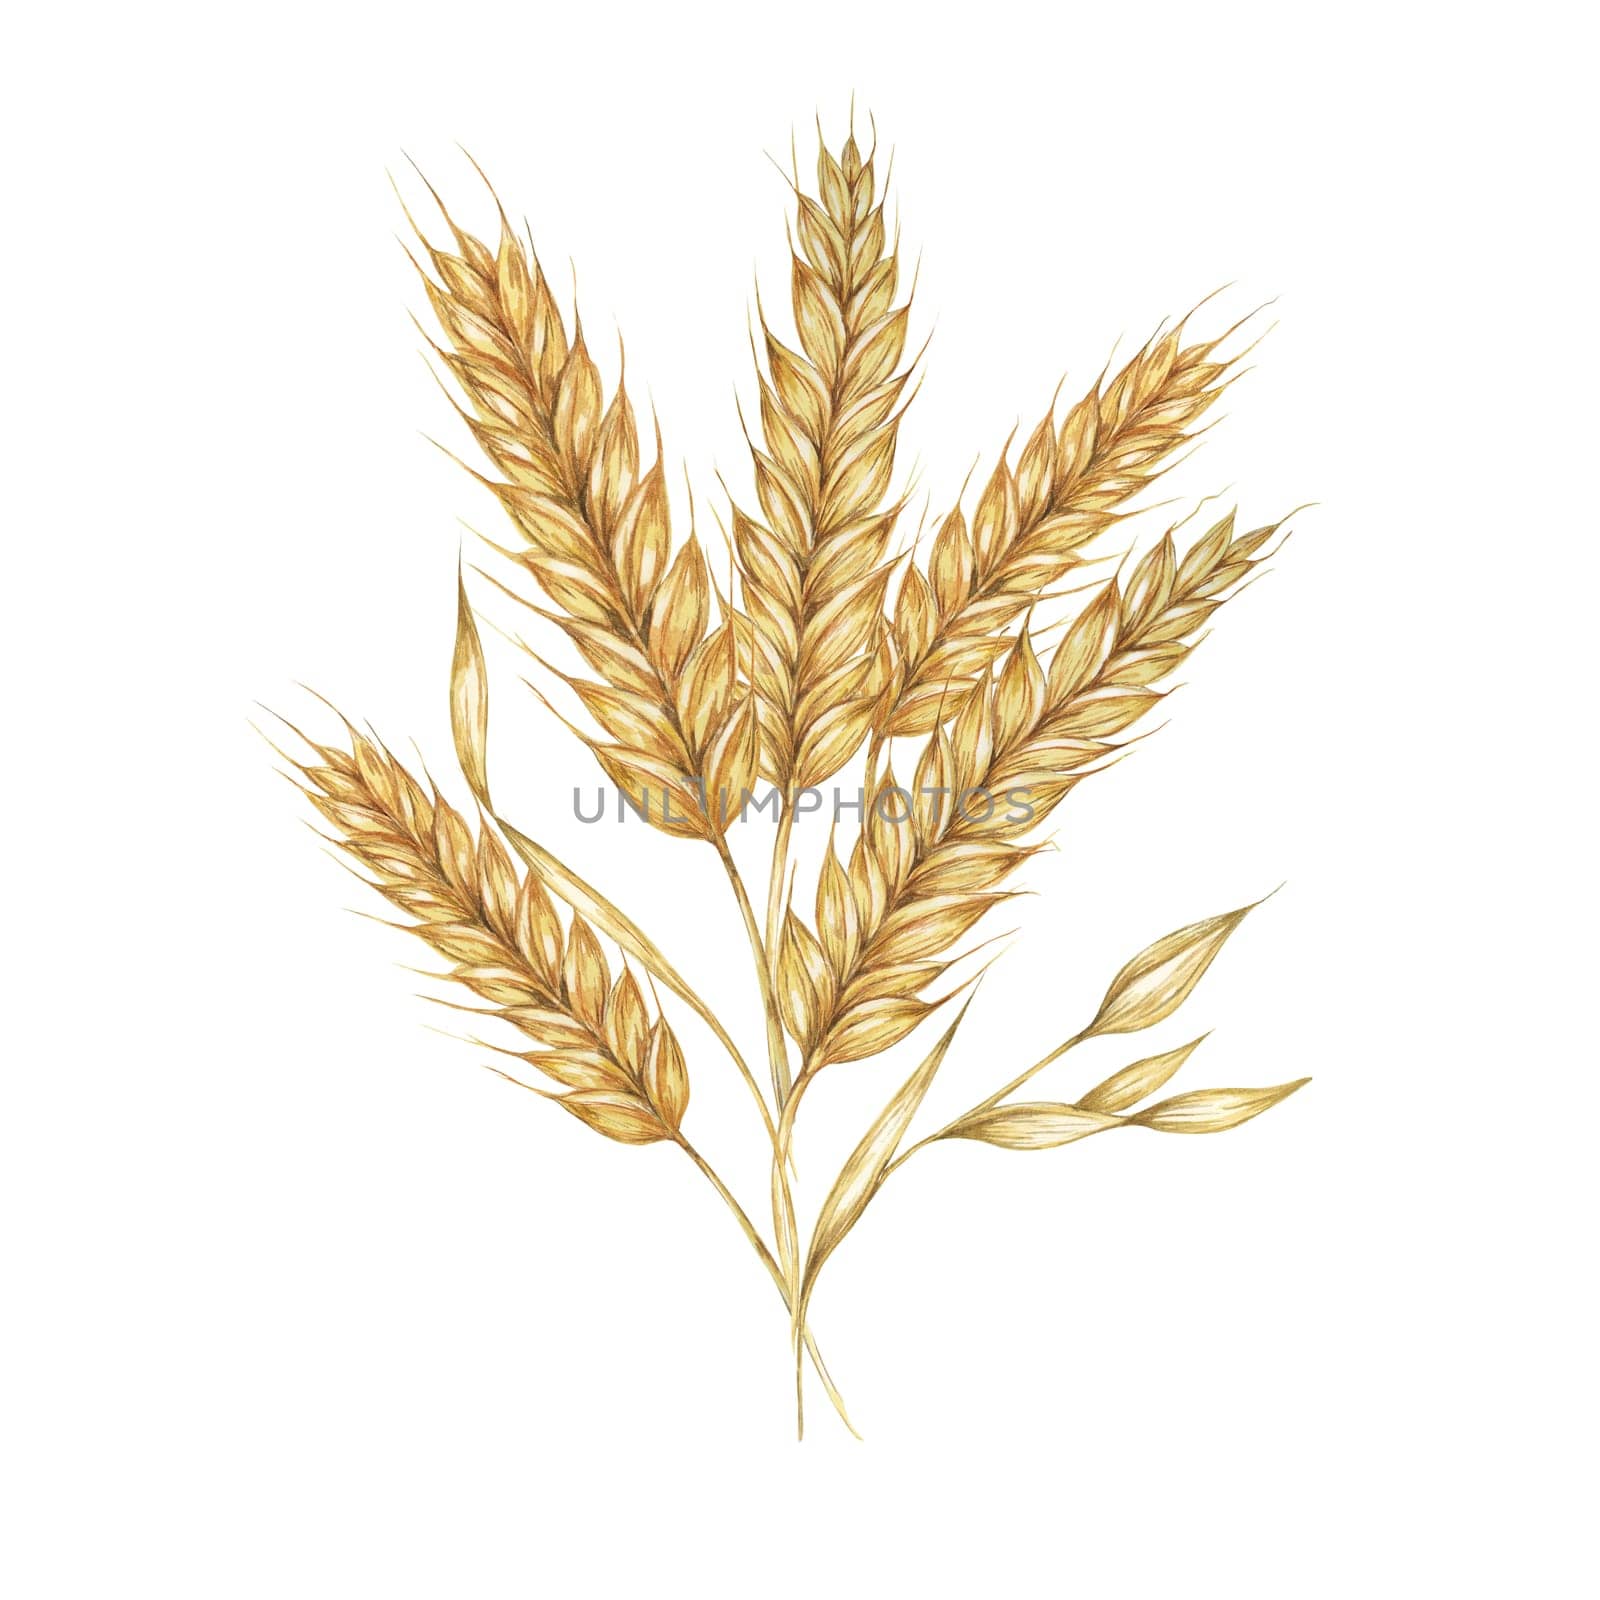 Barley spikes bouquet, cereal ears, wheat stalks. Grains for Shavuot, Thanksgiving, Oktoberfest clipart. Cottagecore rustic watercolor illustration for beer whisky, bread, flour packaging, label.